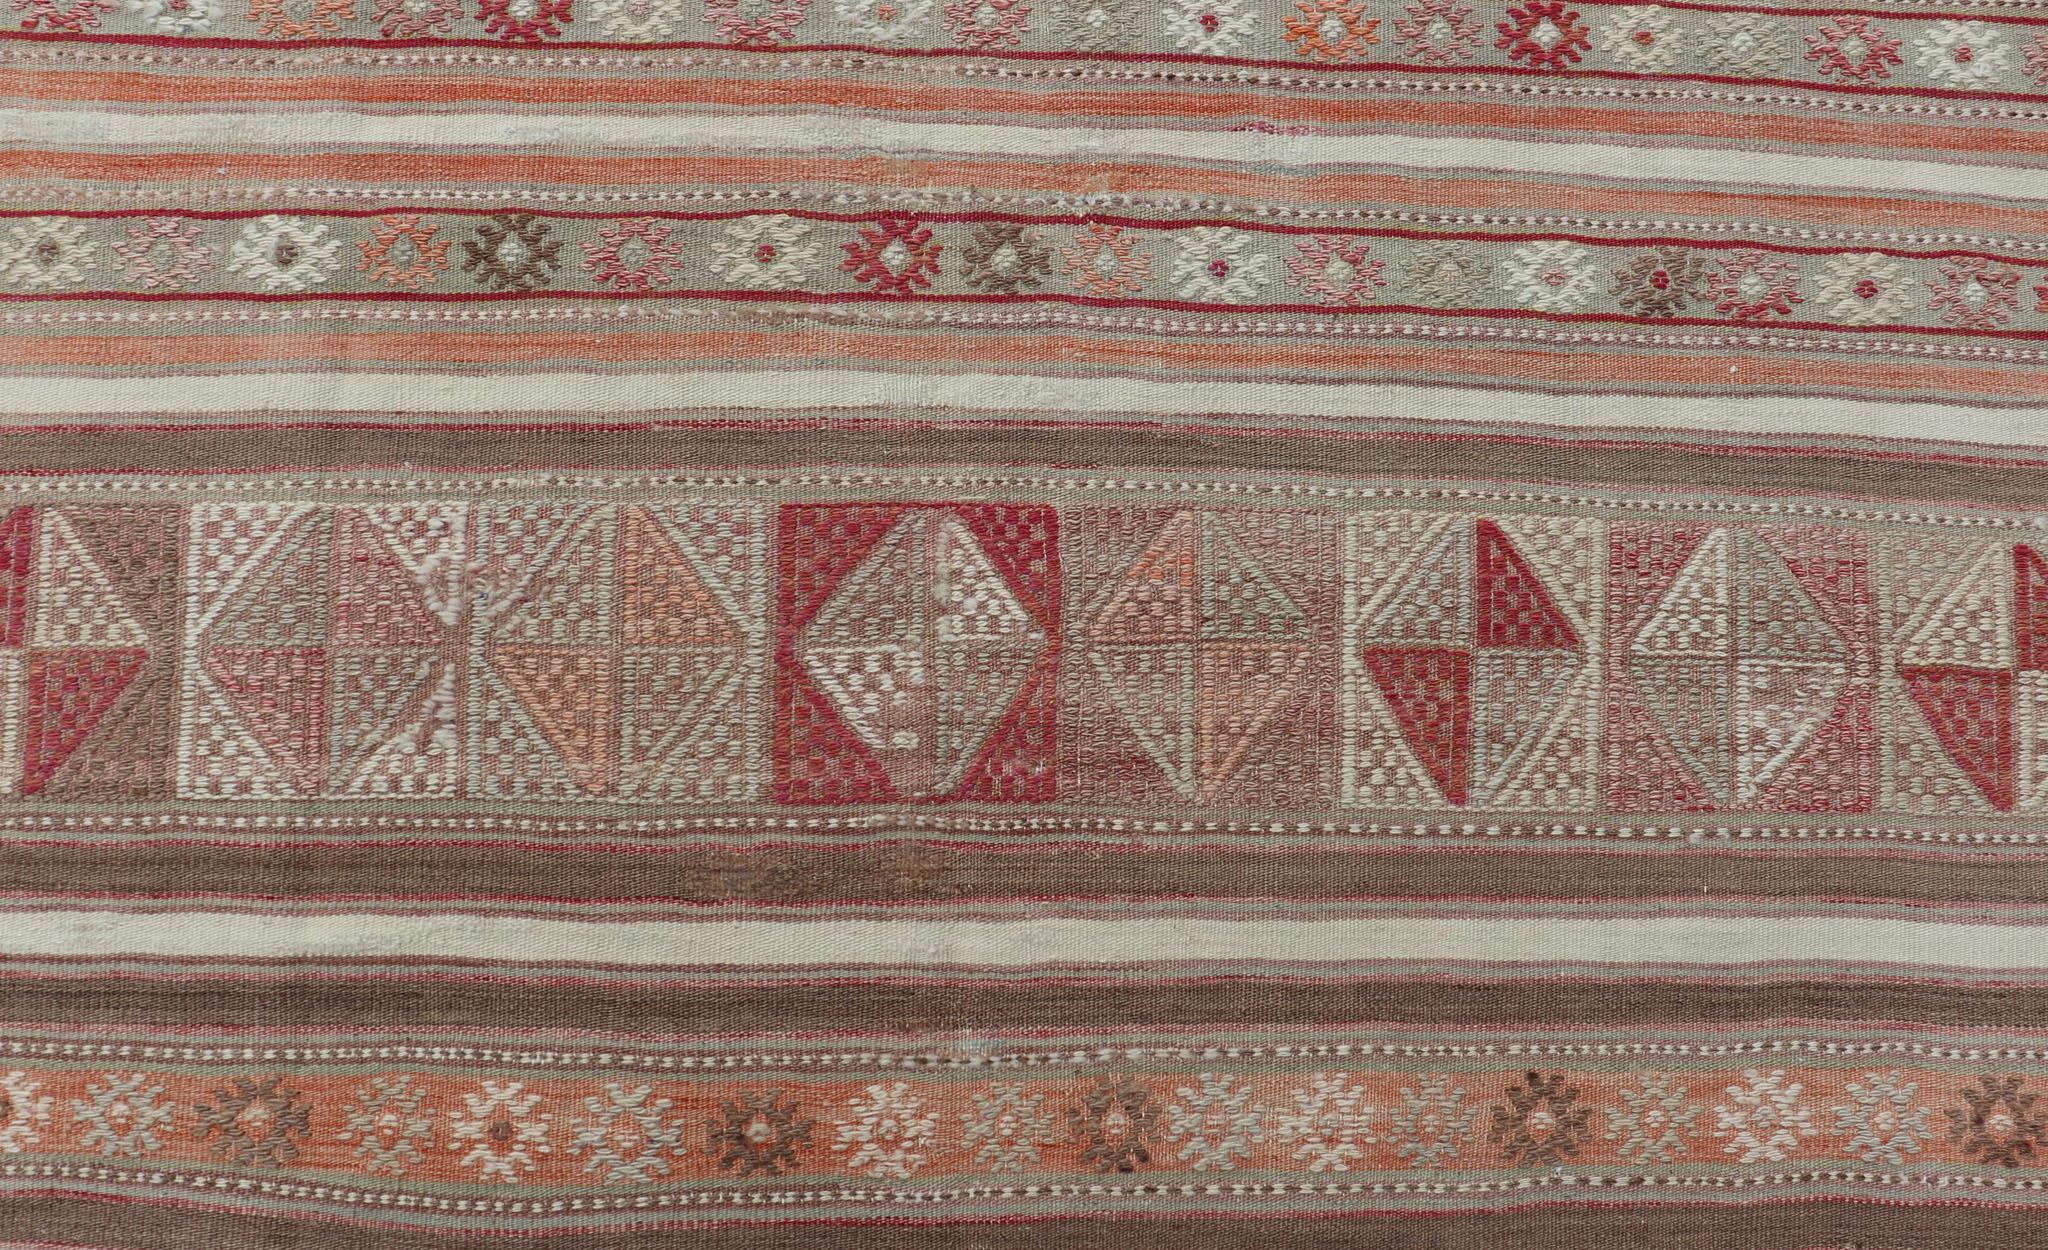 Hand-Woven Colorful Turkish Vintage Embroidered Kilim with Stripes and Geometric Motifs For Sale